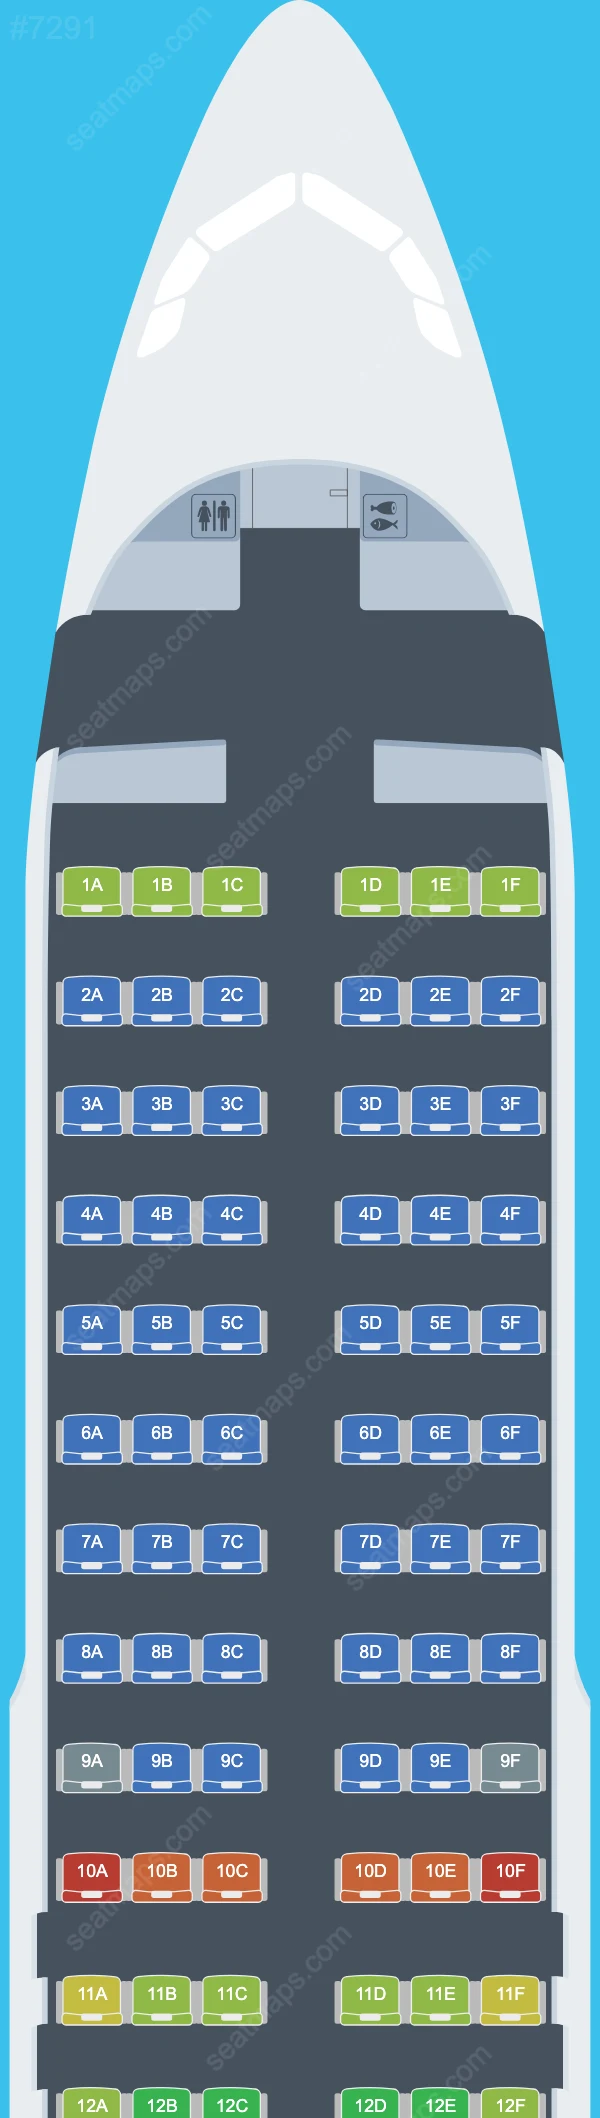 Eurowings Airbus A320 Seat Maps A320-200 V.2